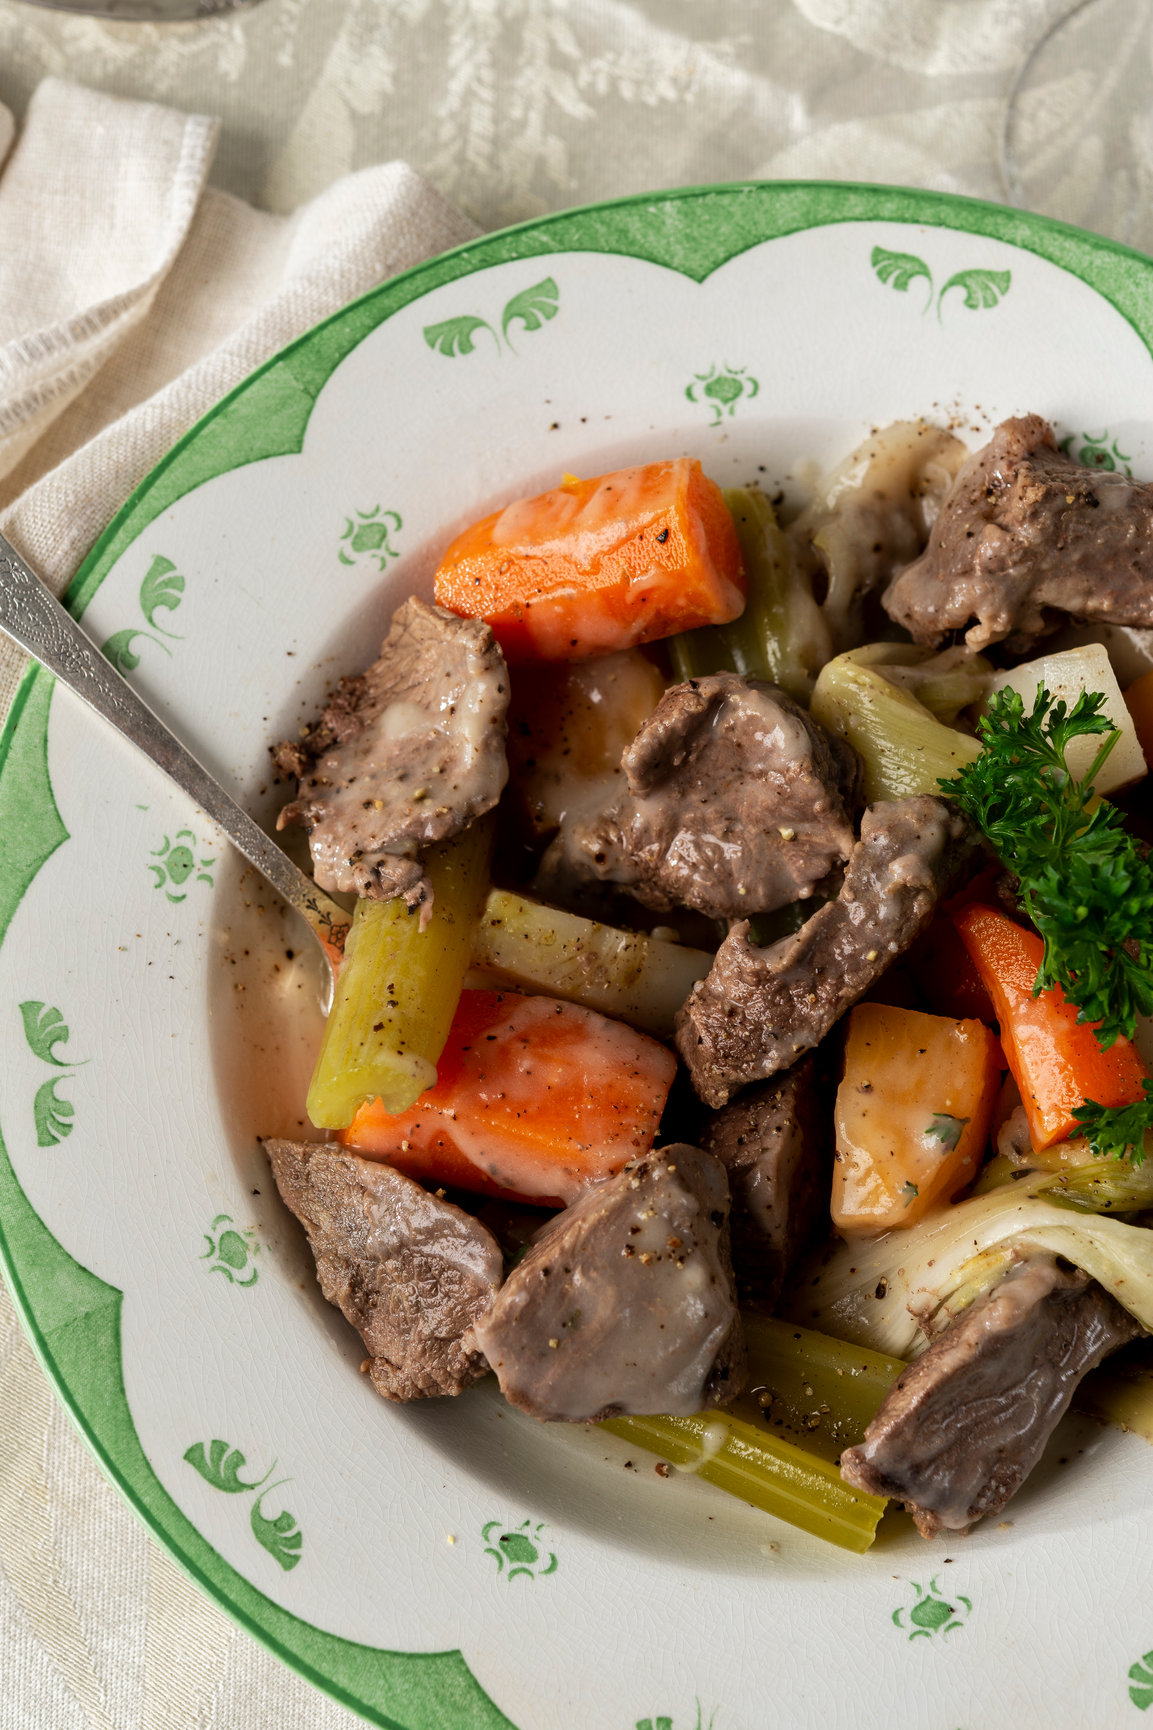 Classic Pot-au-Feu (French Boiled Beef and Vegetables) Recipe